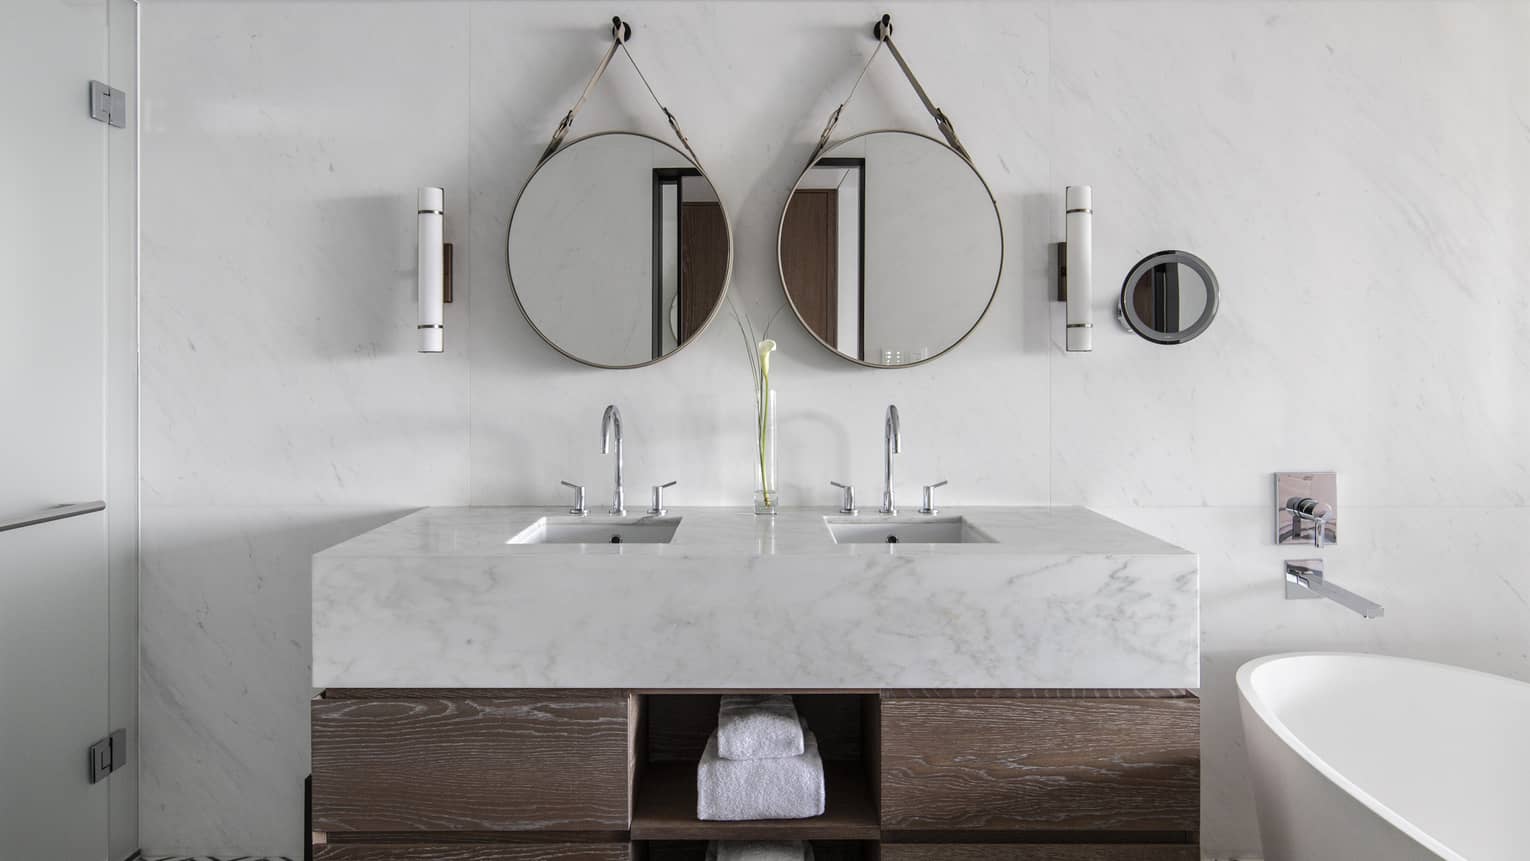 Bathroom with marble and wood vanity, two round mirrors, white tub